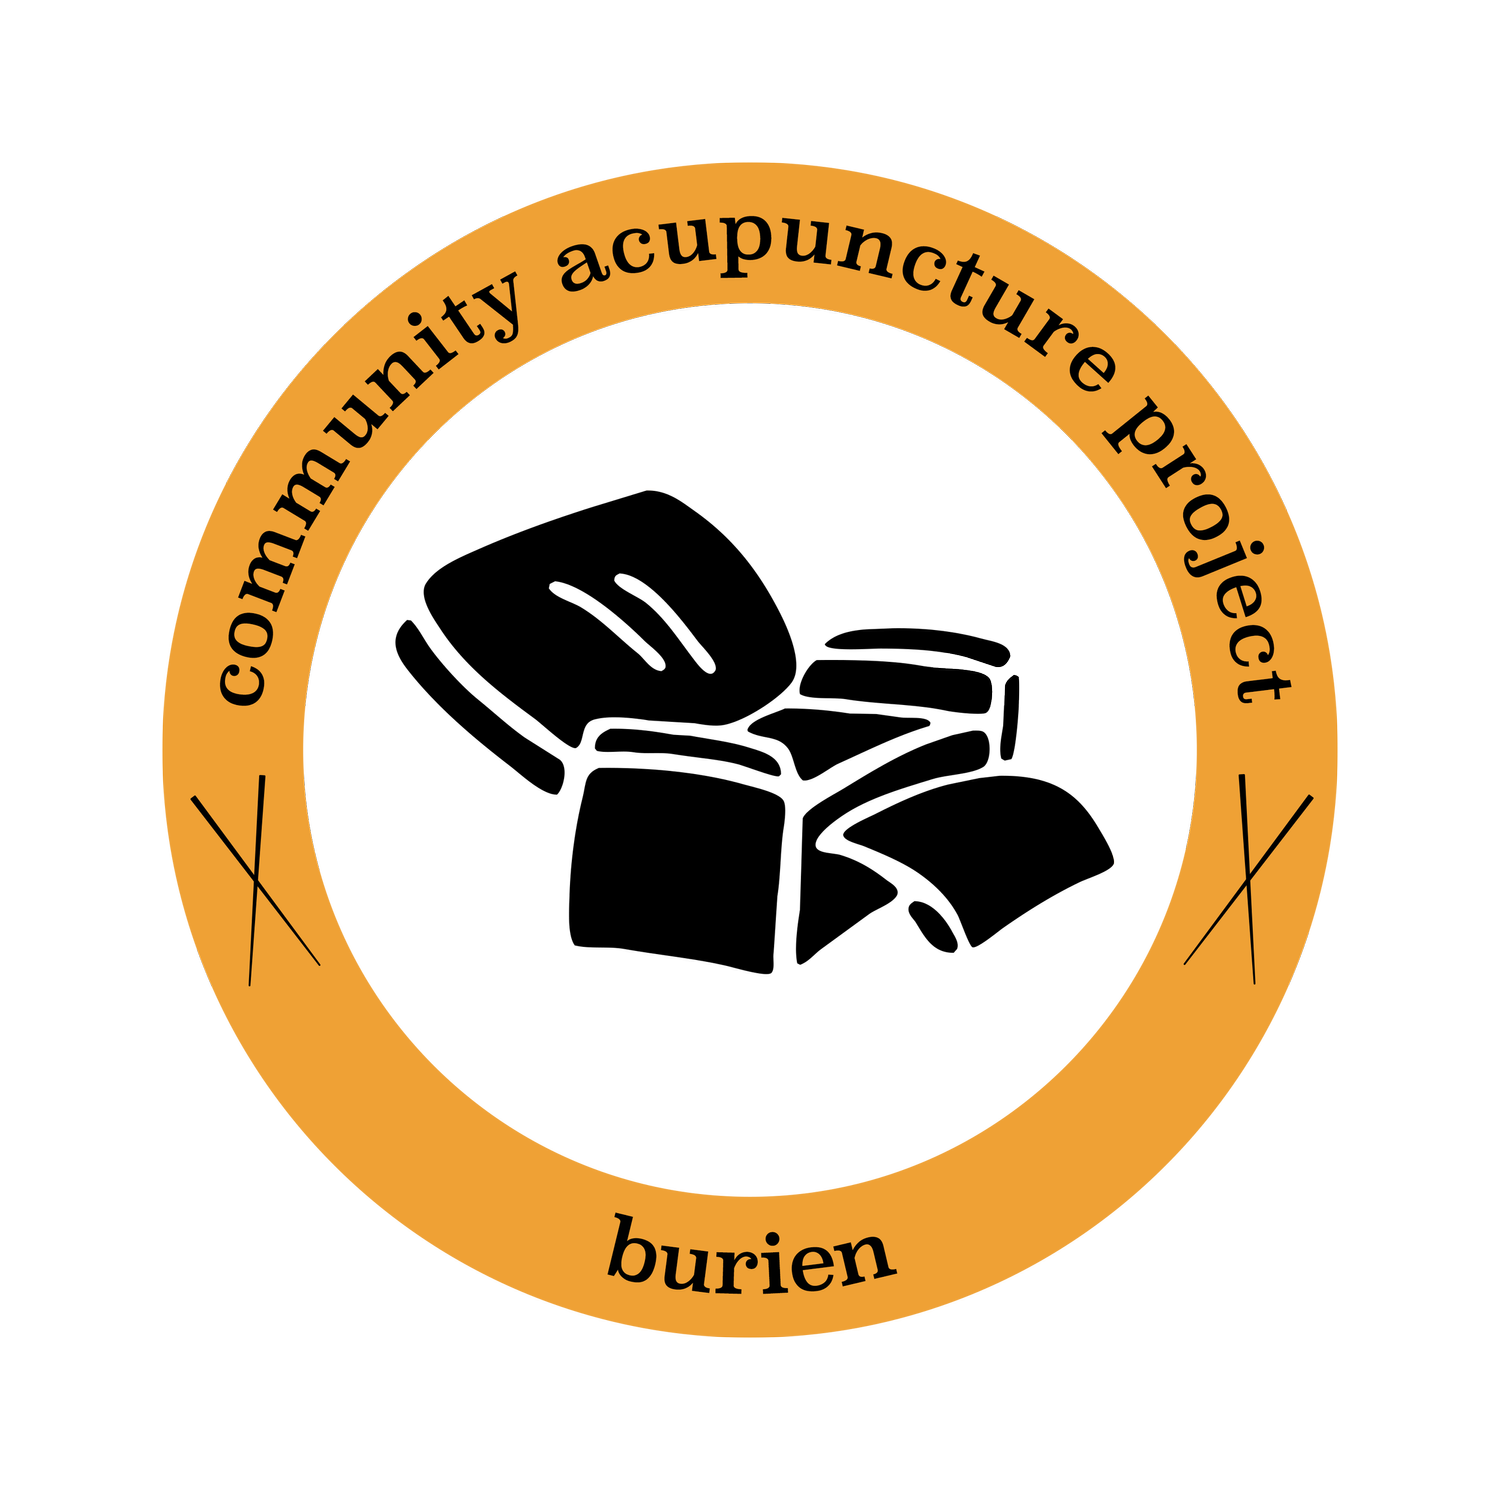 Community Acupuncture Project of West Seattle and Burien